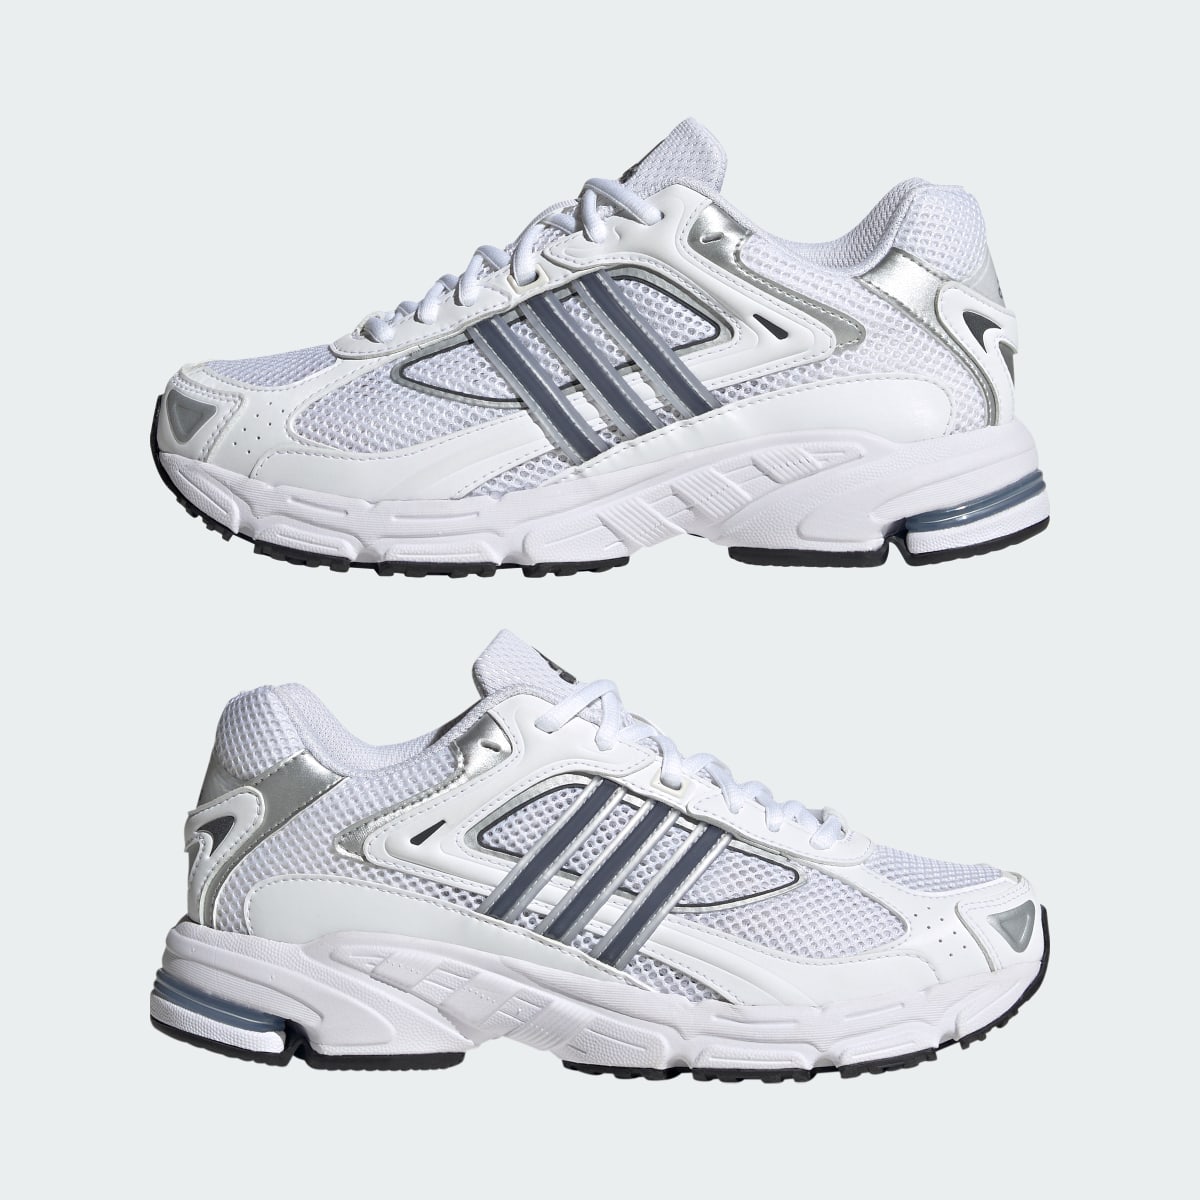 Adidas Response CL Shoes. 11